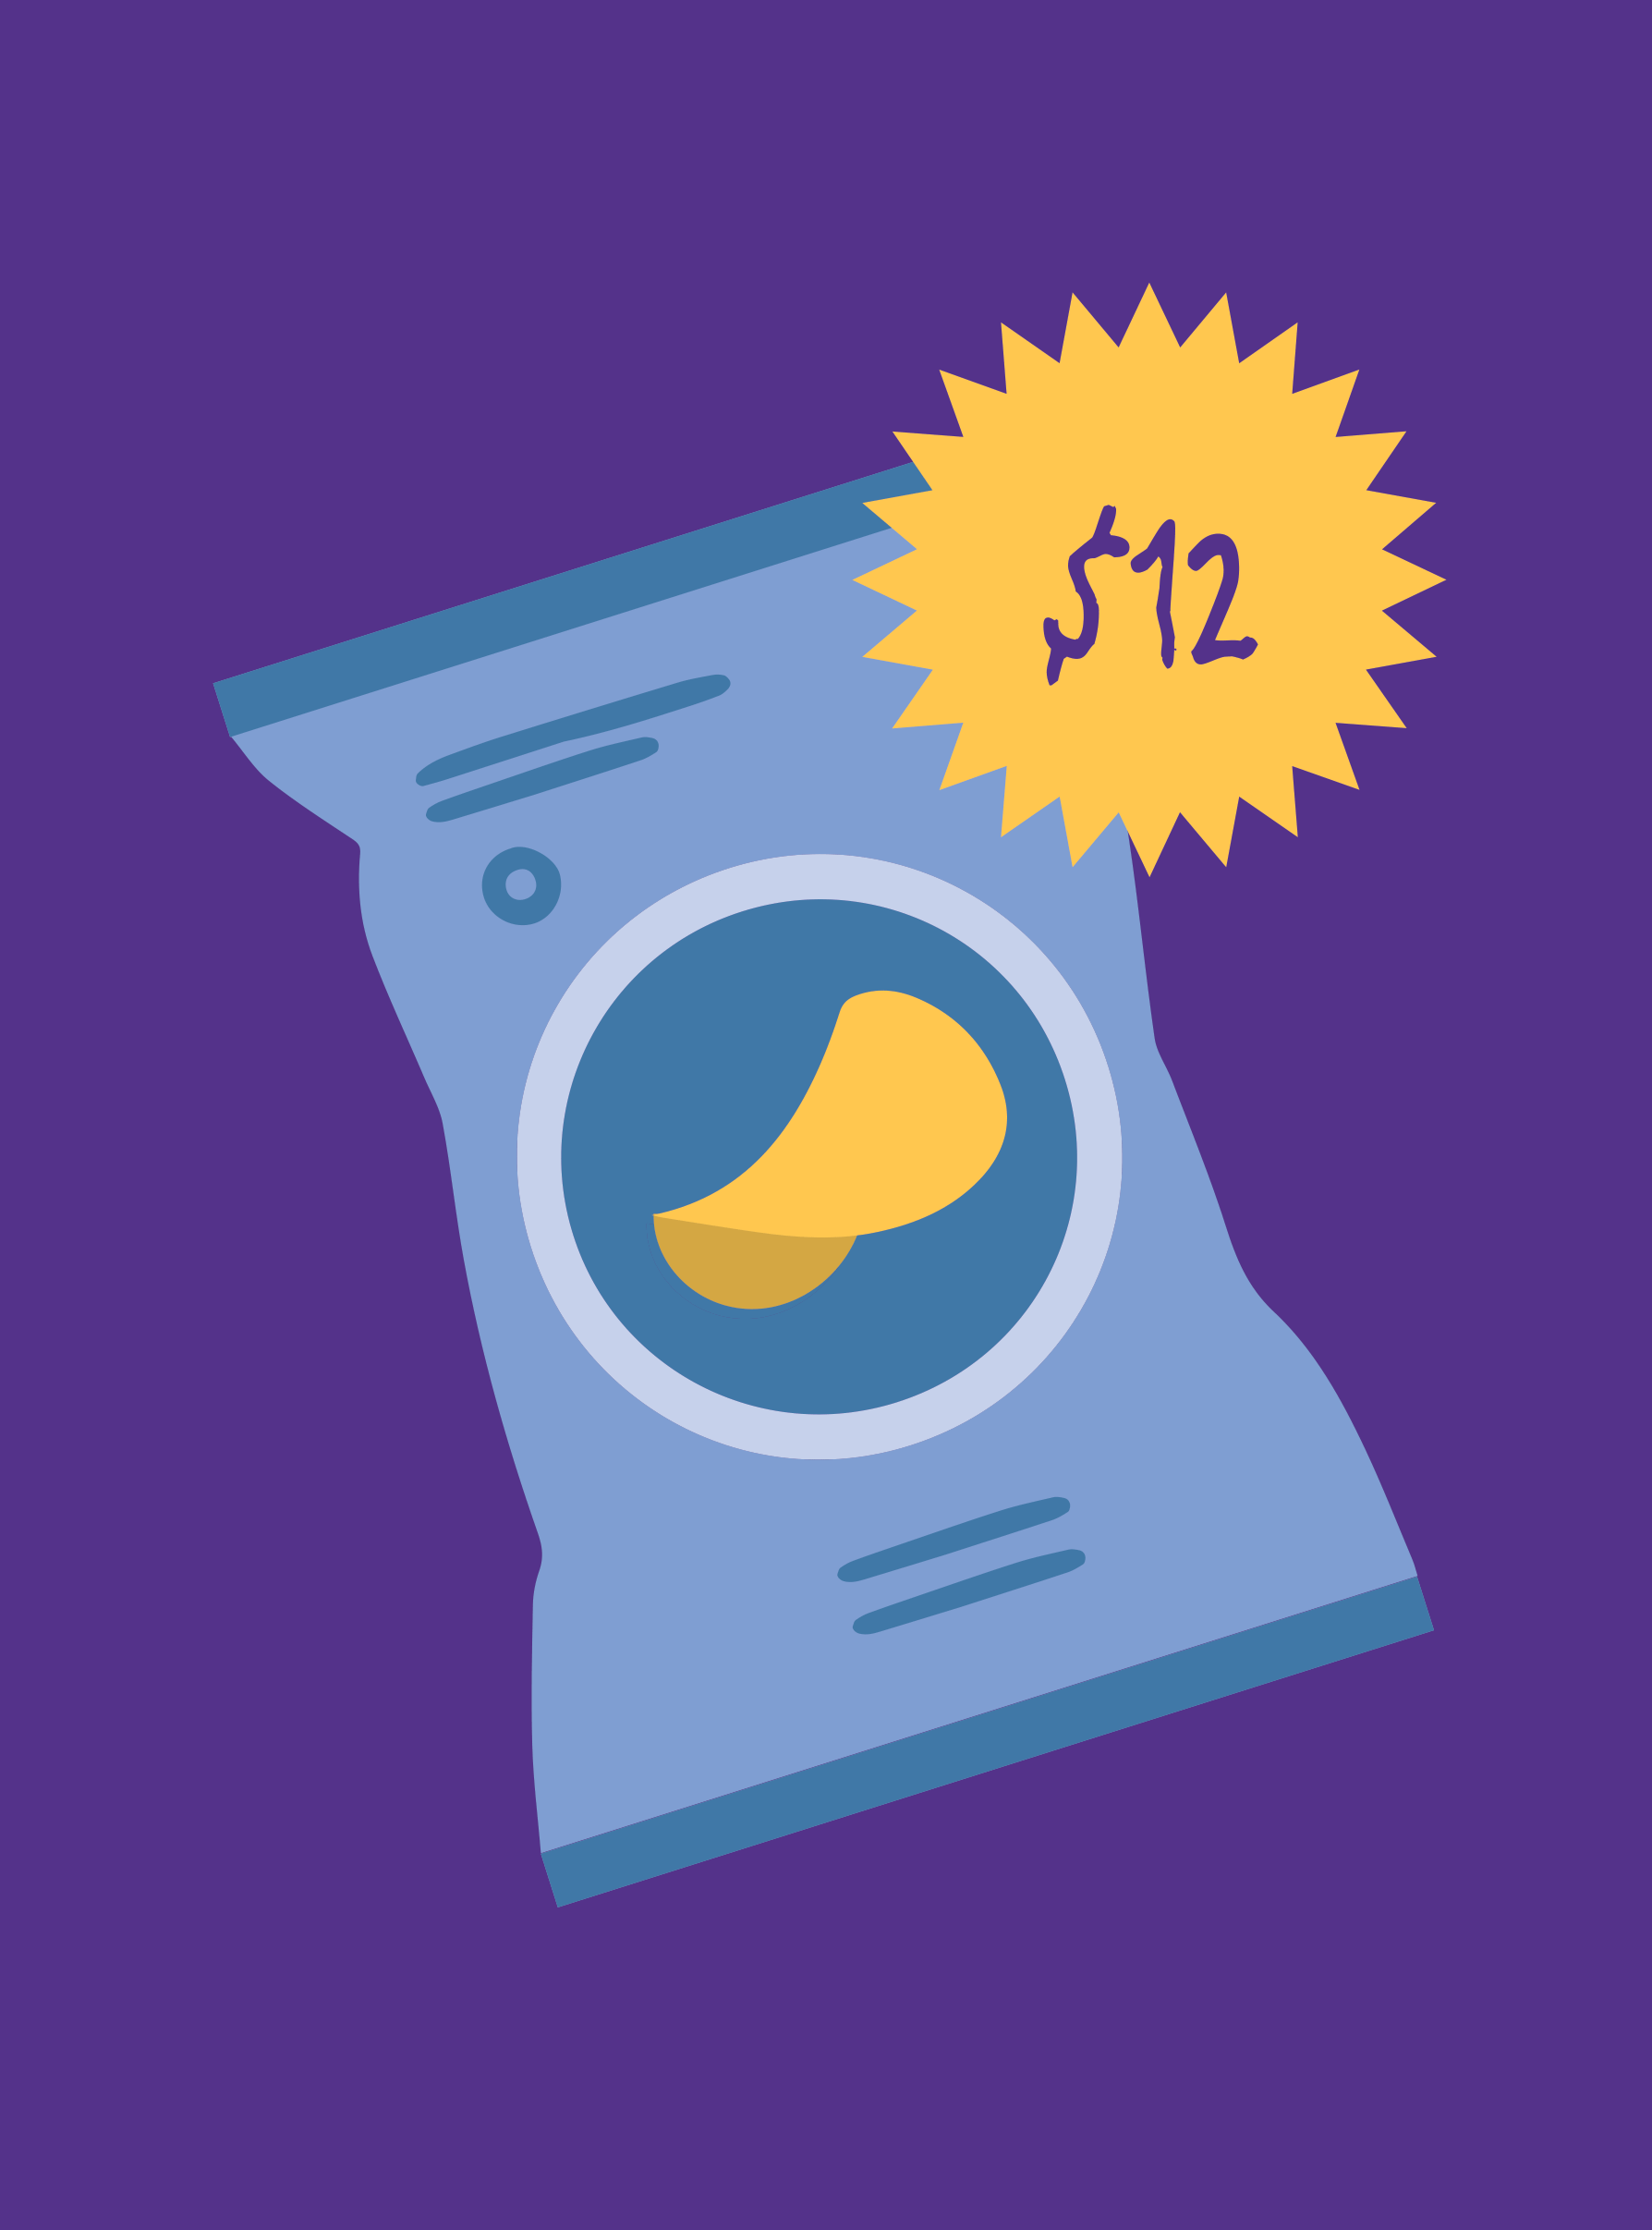 An animated illustration in which the pricetag on a bag of chips changes from $12 to $17